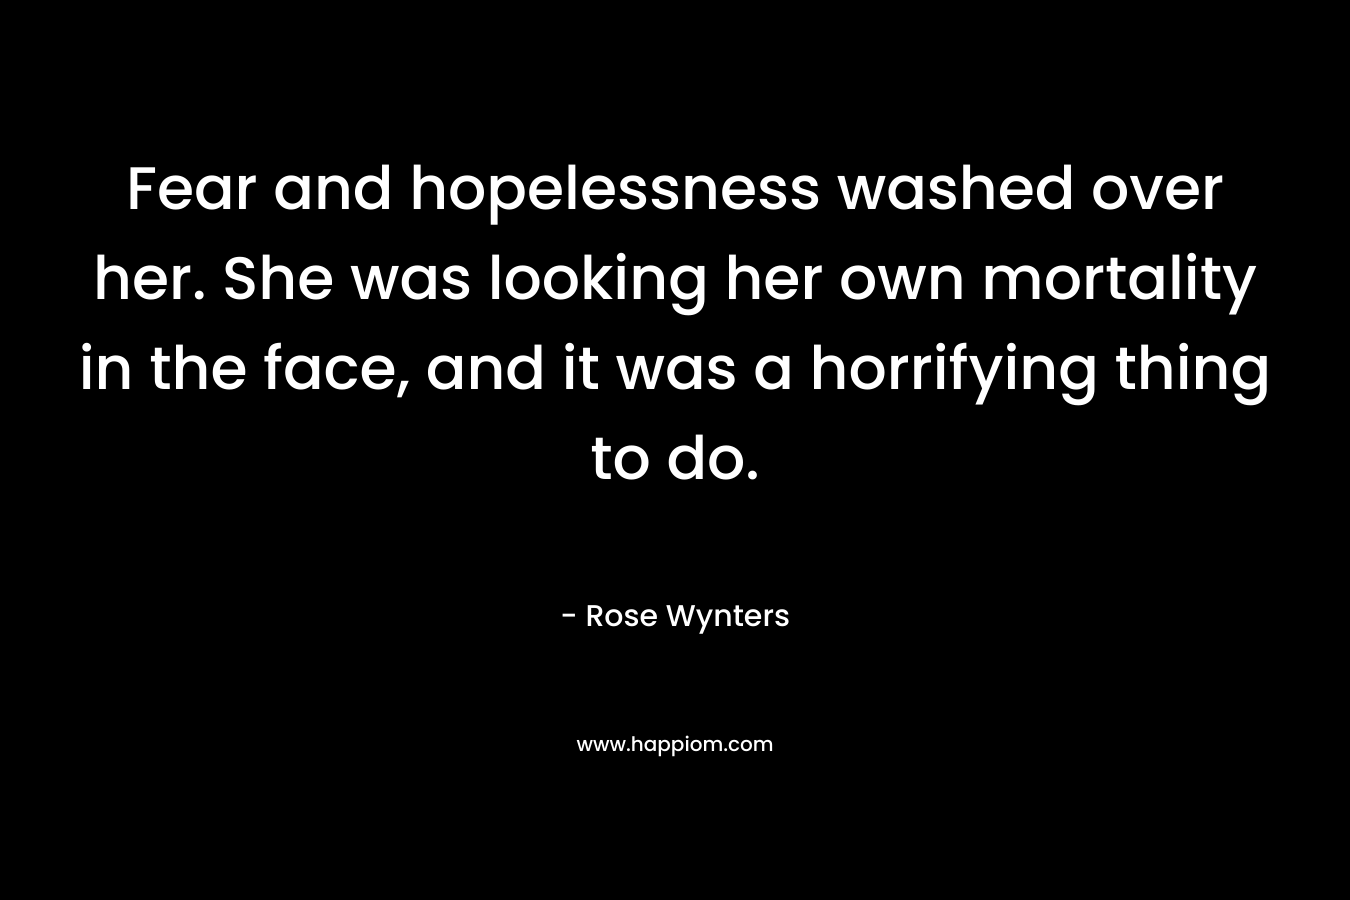 Fear and hopelessness washed over her. She was looking her own mortality in the face, and it was a horrifying thing to do. – Rose Wynters